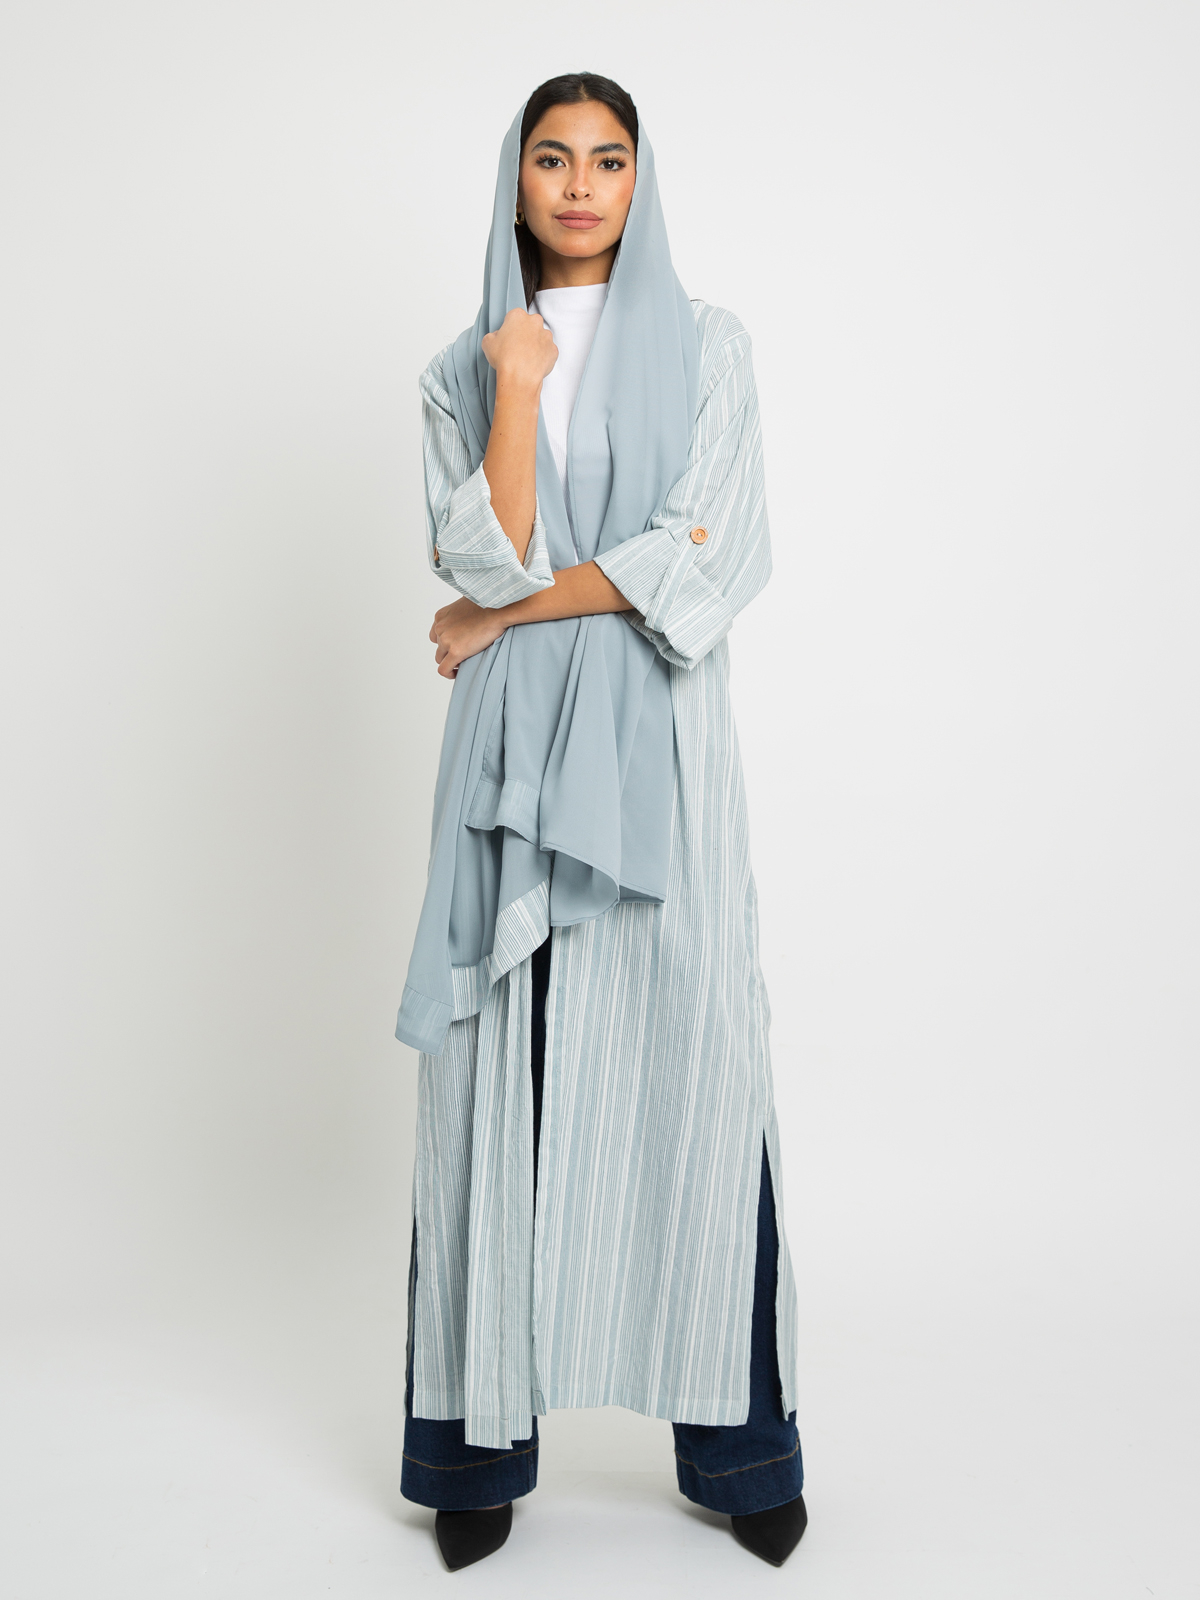 Cairo - Casual Regular-fit Long Open Abaya in Natural Cotton Fabric